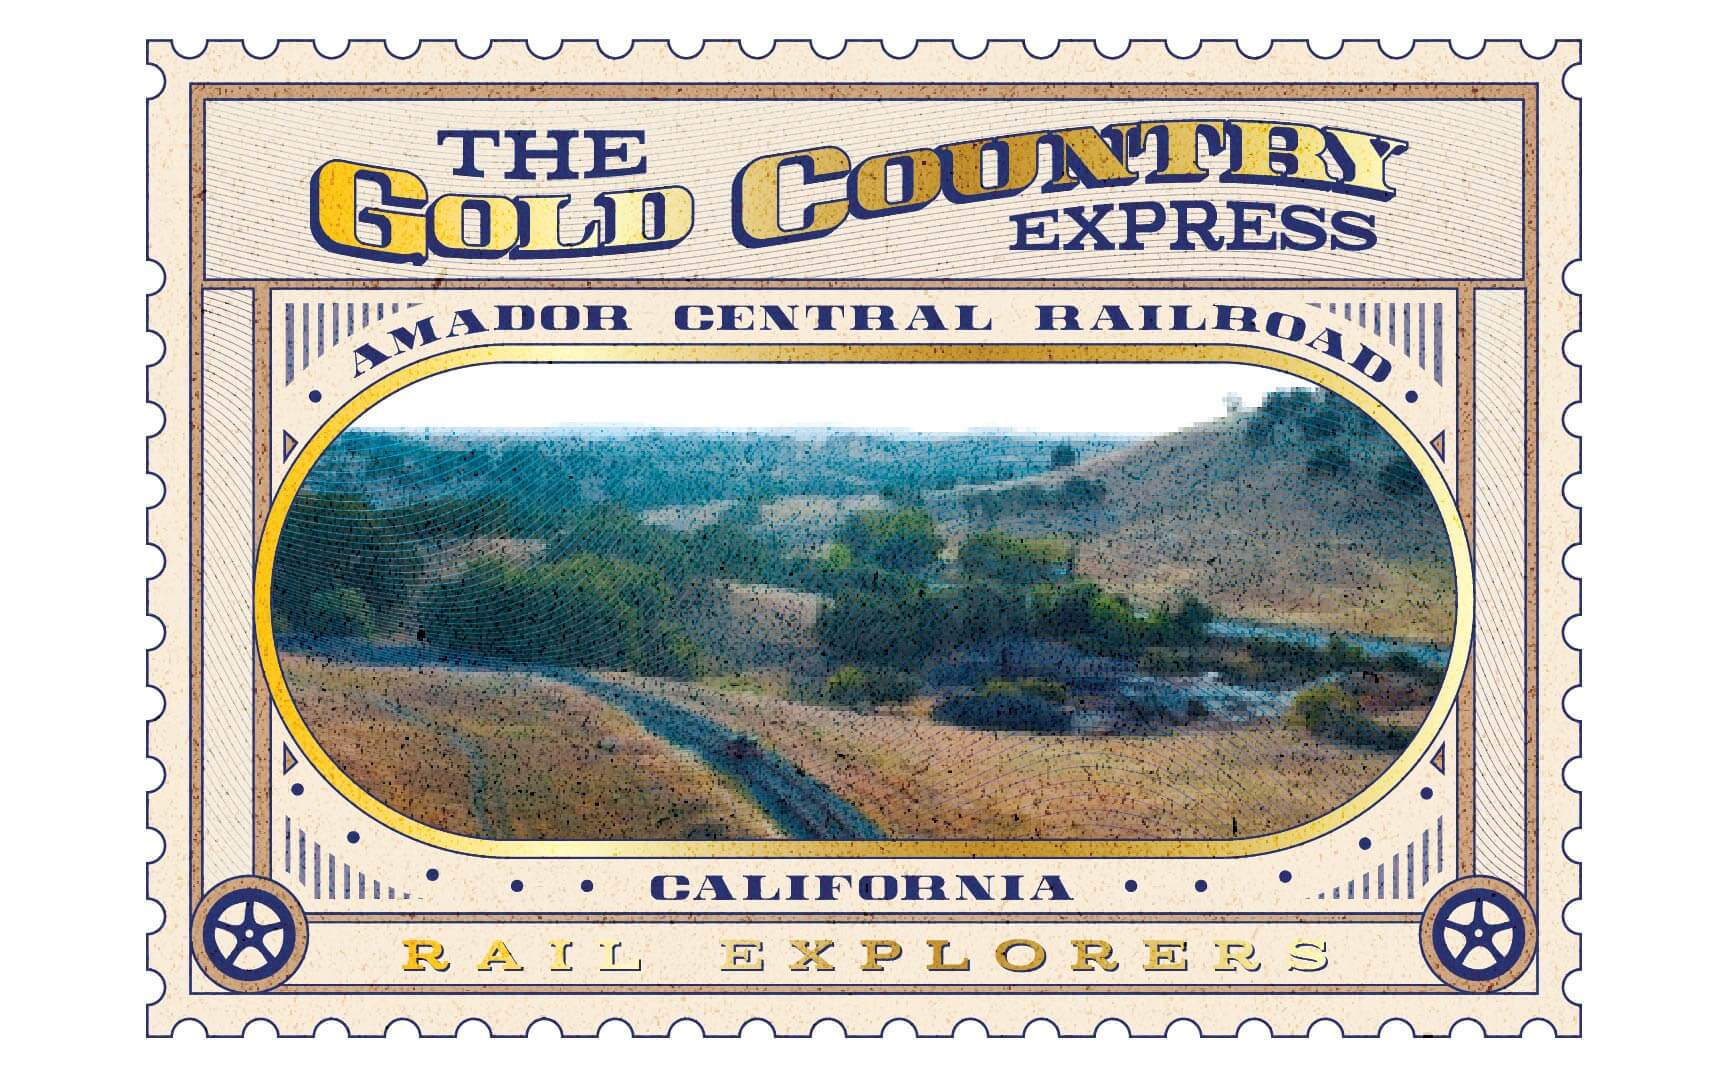 Amador, CA: The Gold Country Express